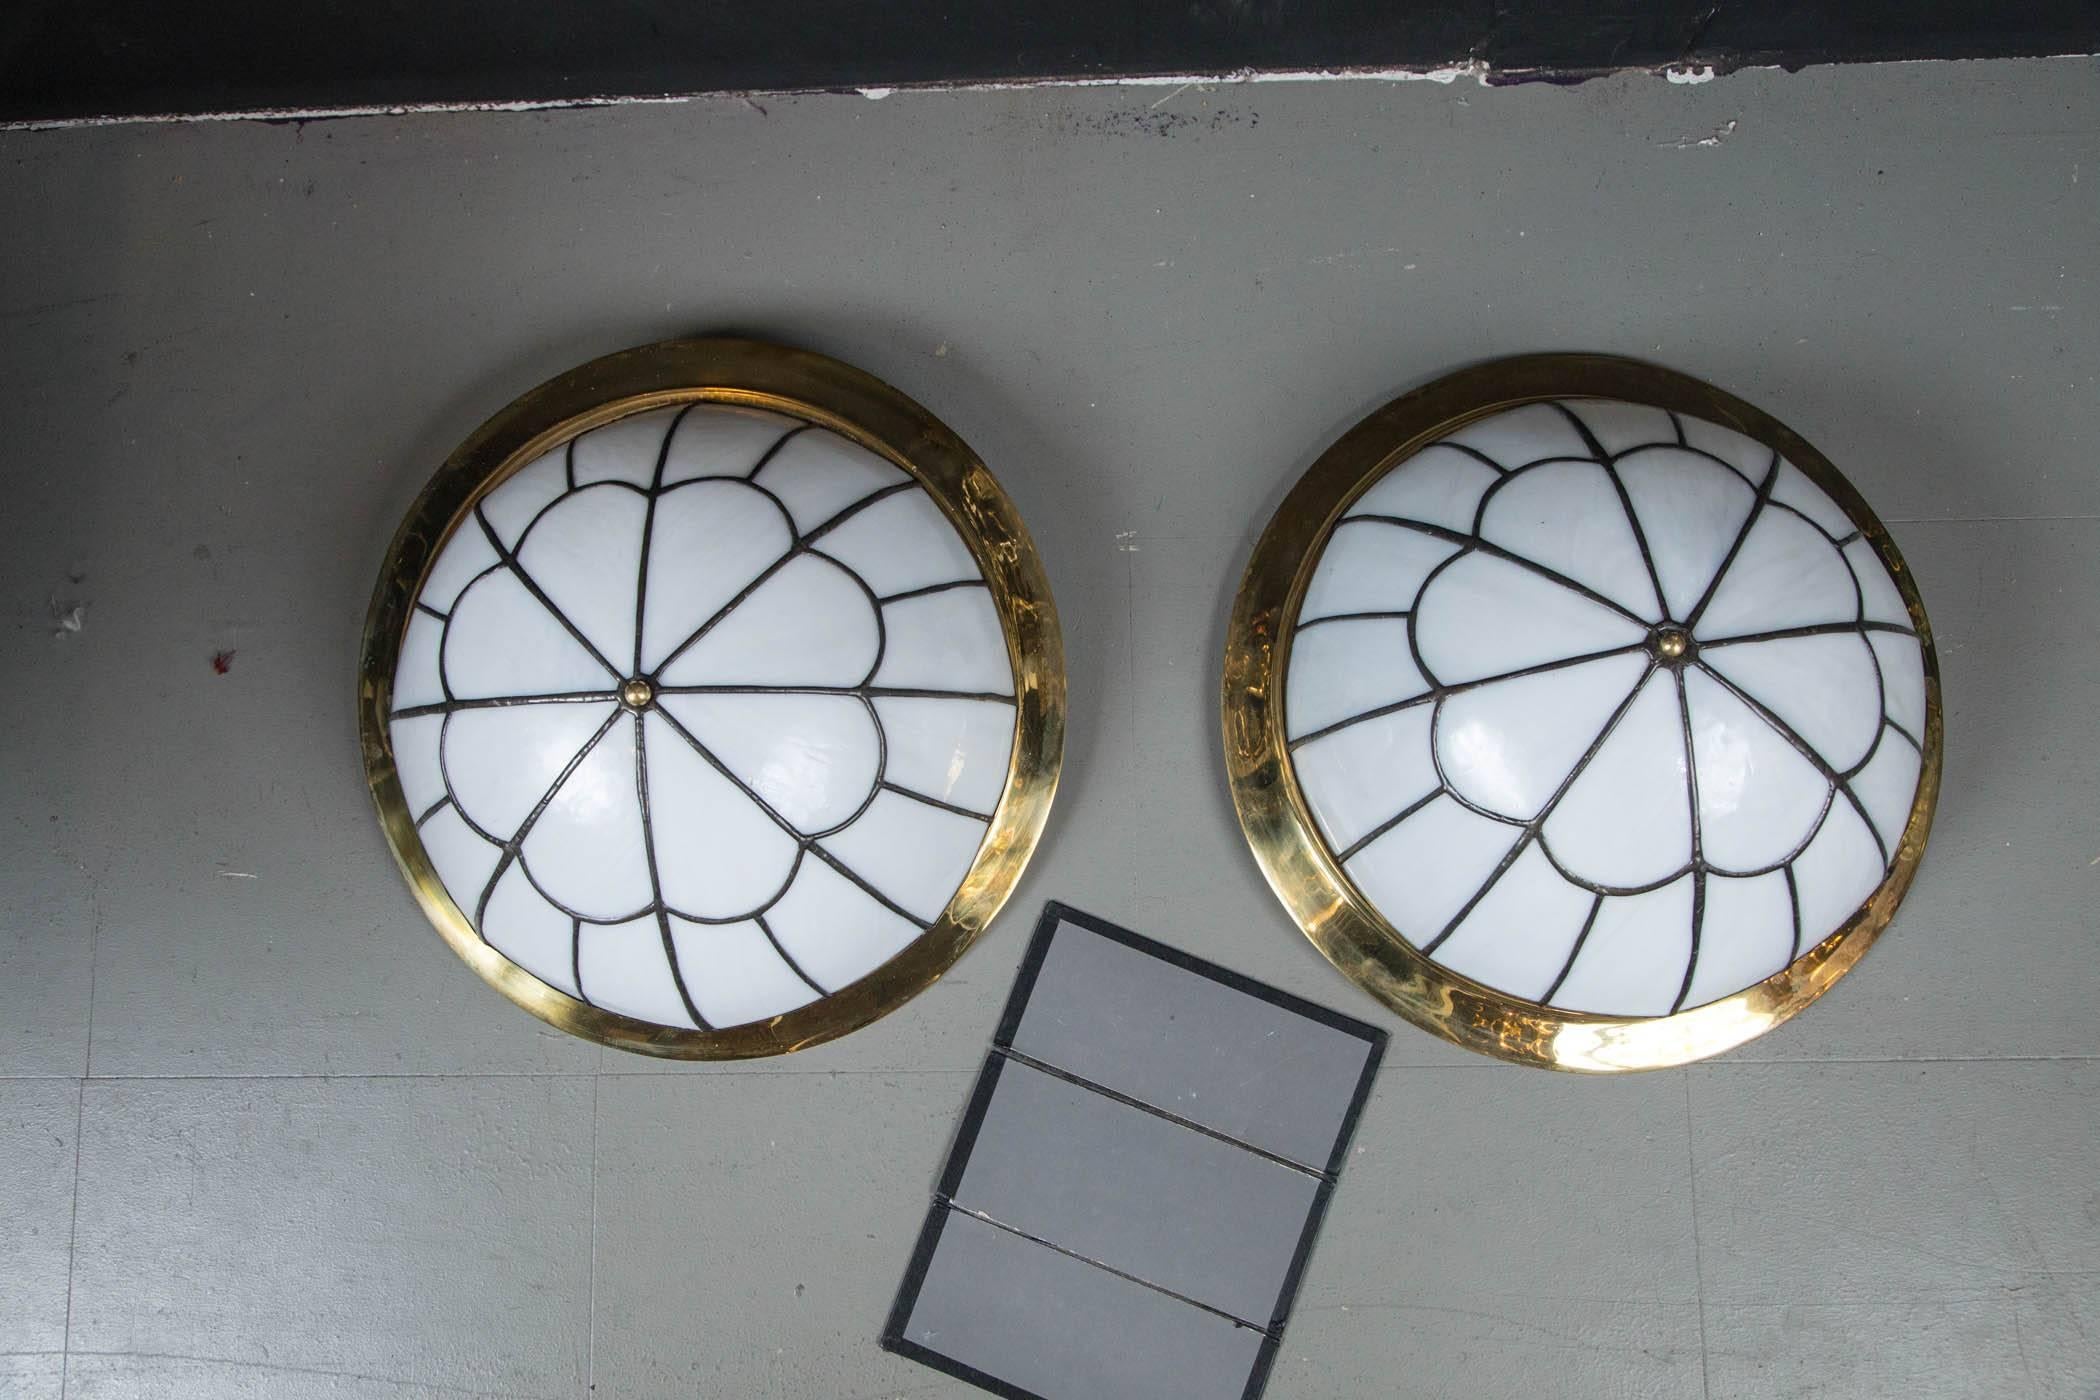 A set of 24 circa 1920s leaded glass flush mounted light fixtures with interior lights. 24 available; $4,800 per fixture.